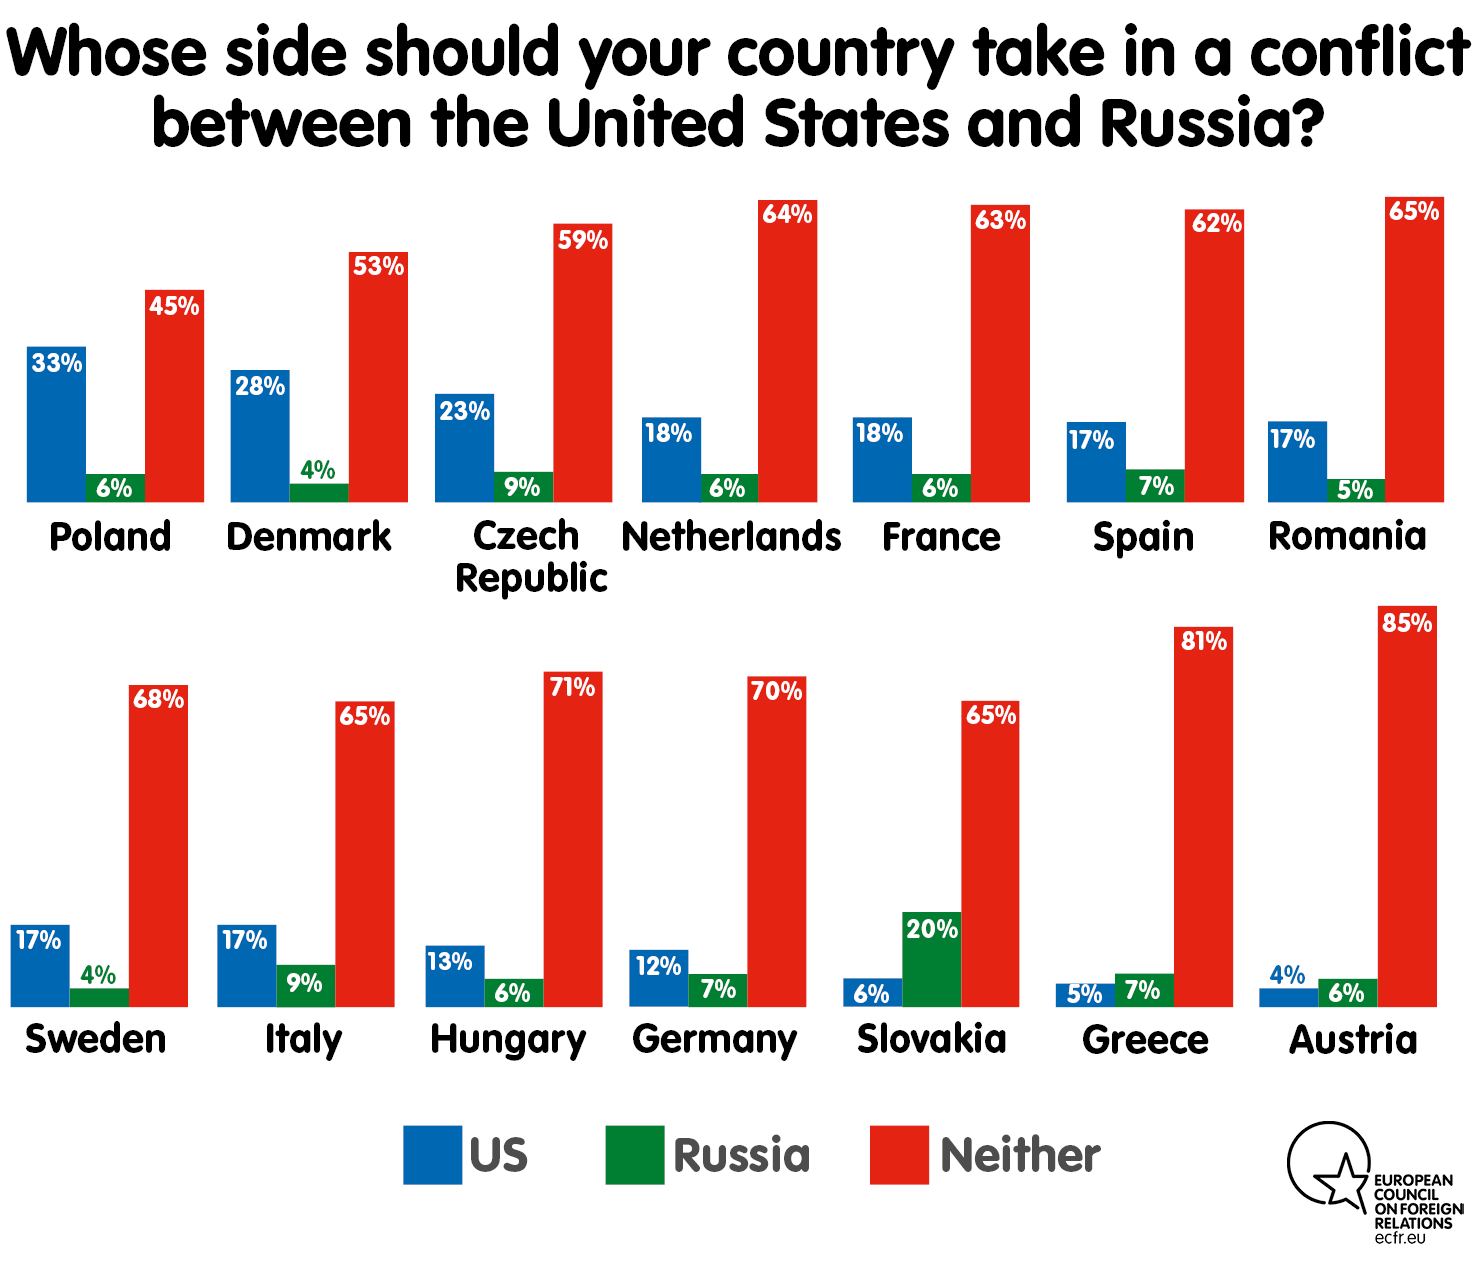 Whose side should your country take in a conflict between the United States and Russia?